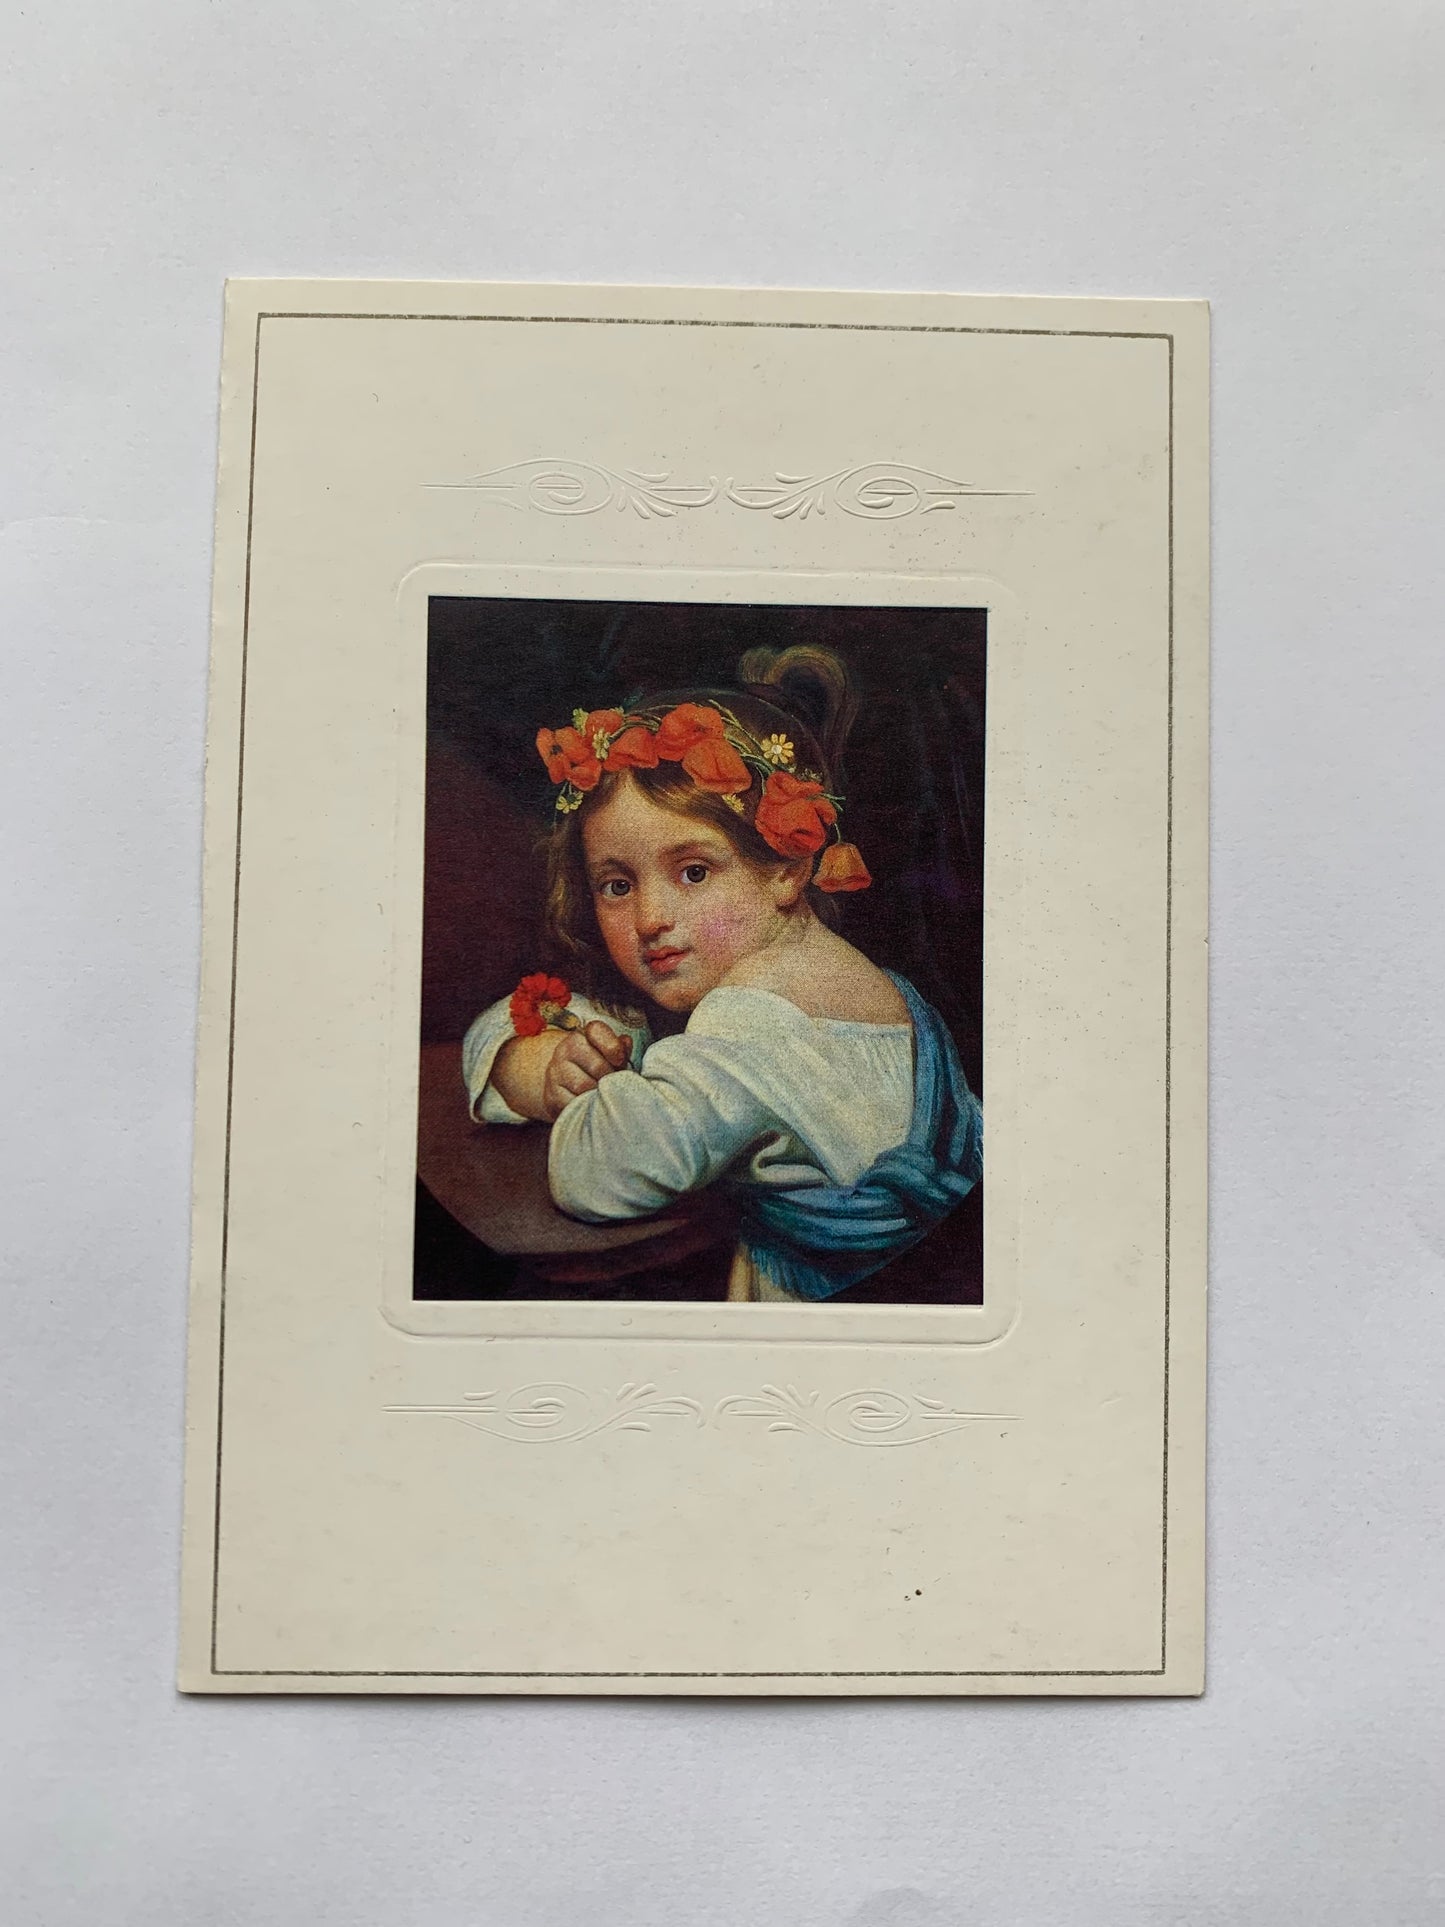 Soviet art postcard - Artist O. KIPRENSKY - A girl in a poppy wreath with a carnation in her hand. (Fragment from 1819 painting) - Russia USSR - 1982 - unused